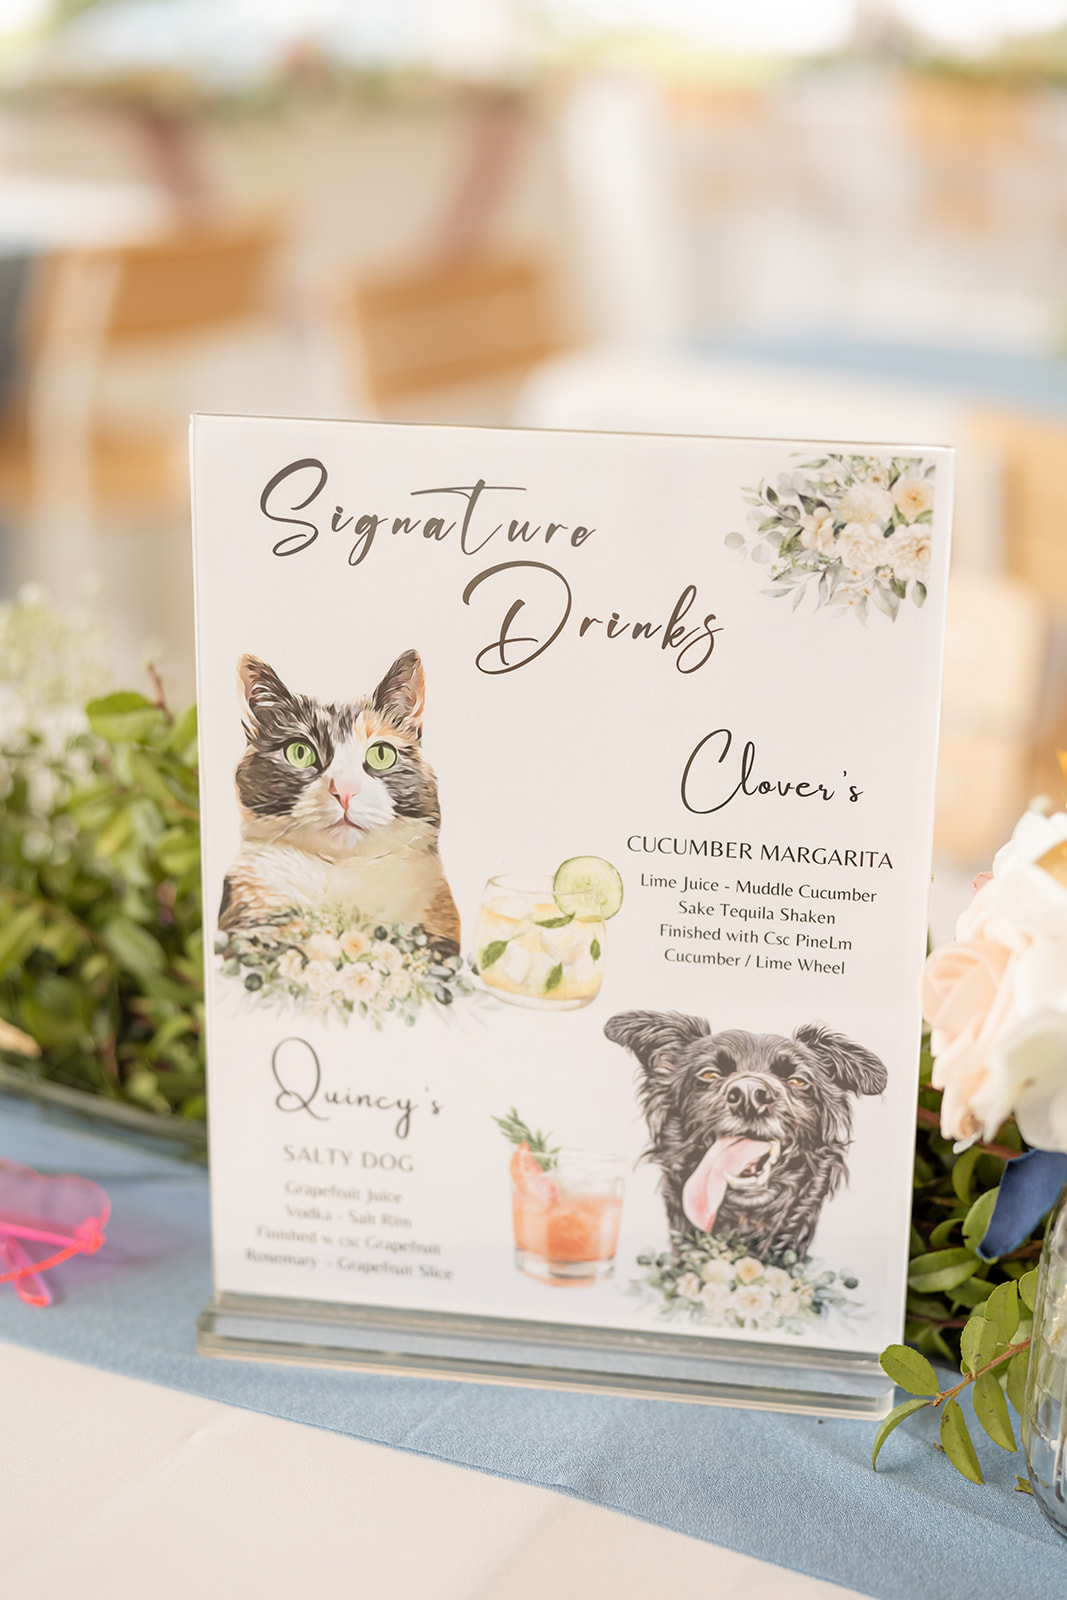 incorporating pets into wedding day signage